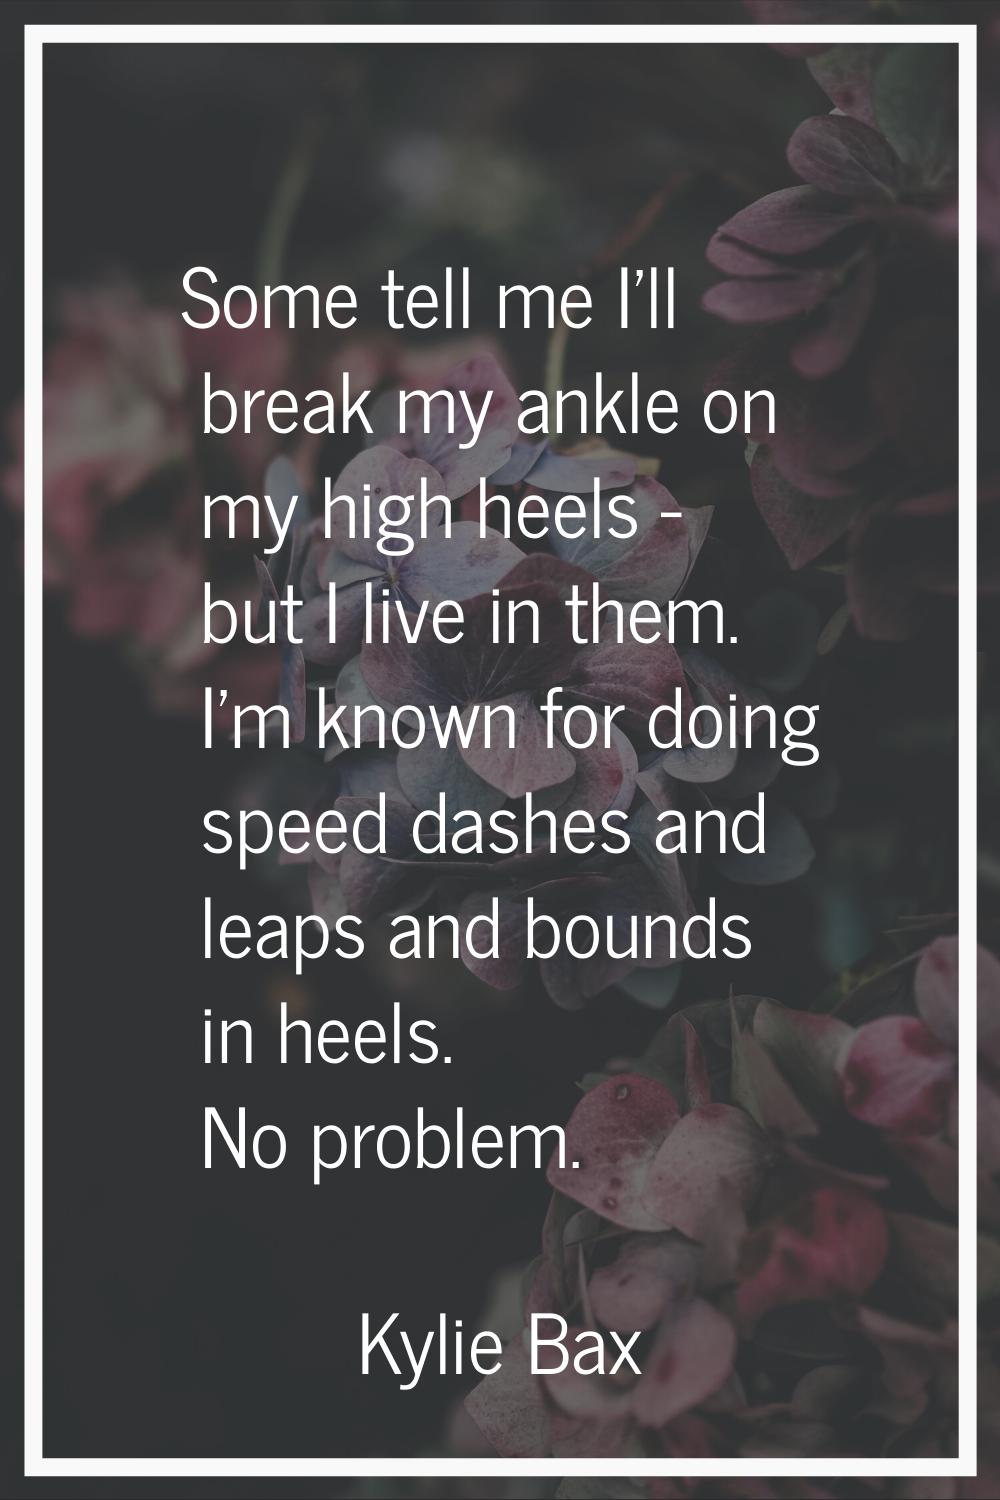 Some tell me I'll break my ankle on my high heels - but I live in them. I'm known for doing speed d